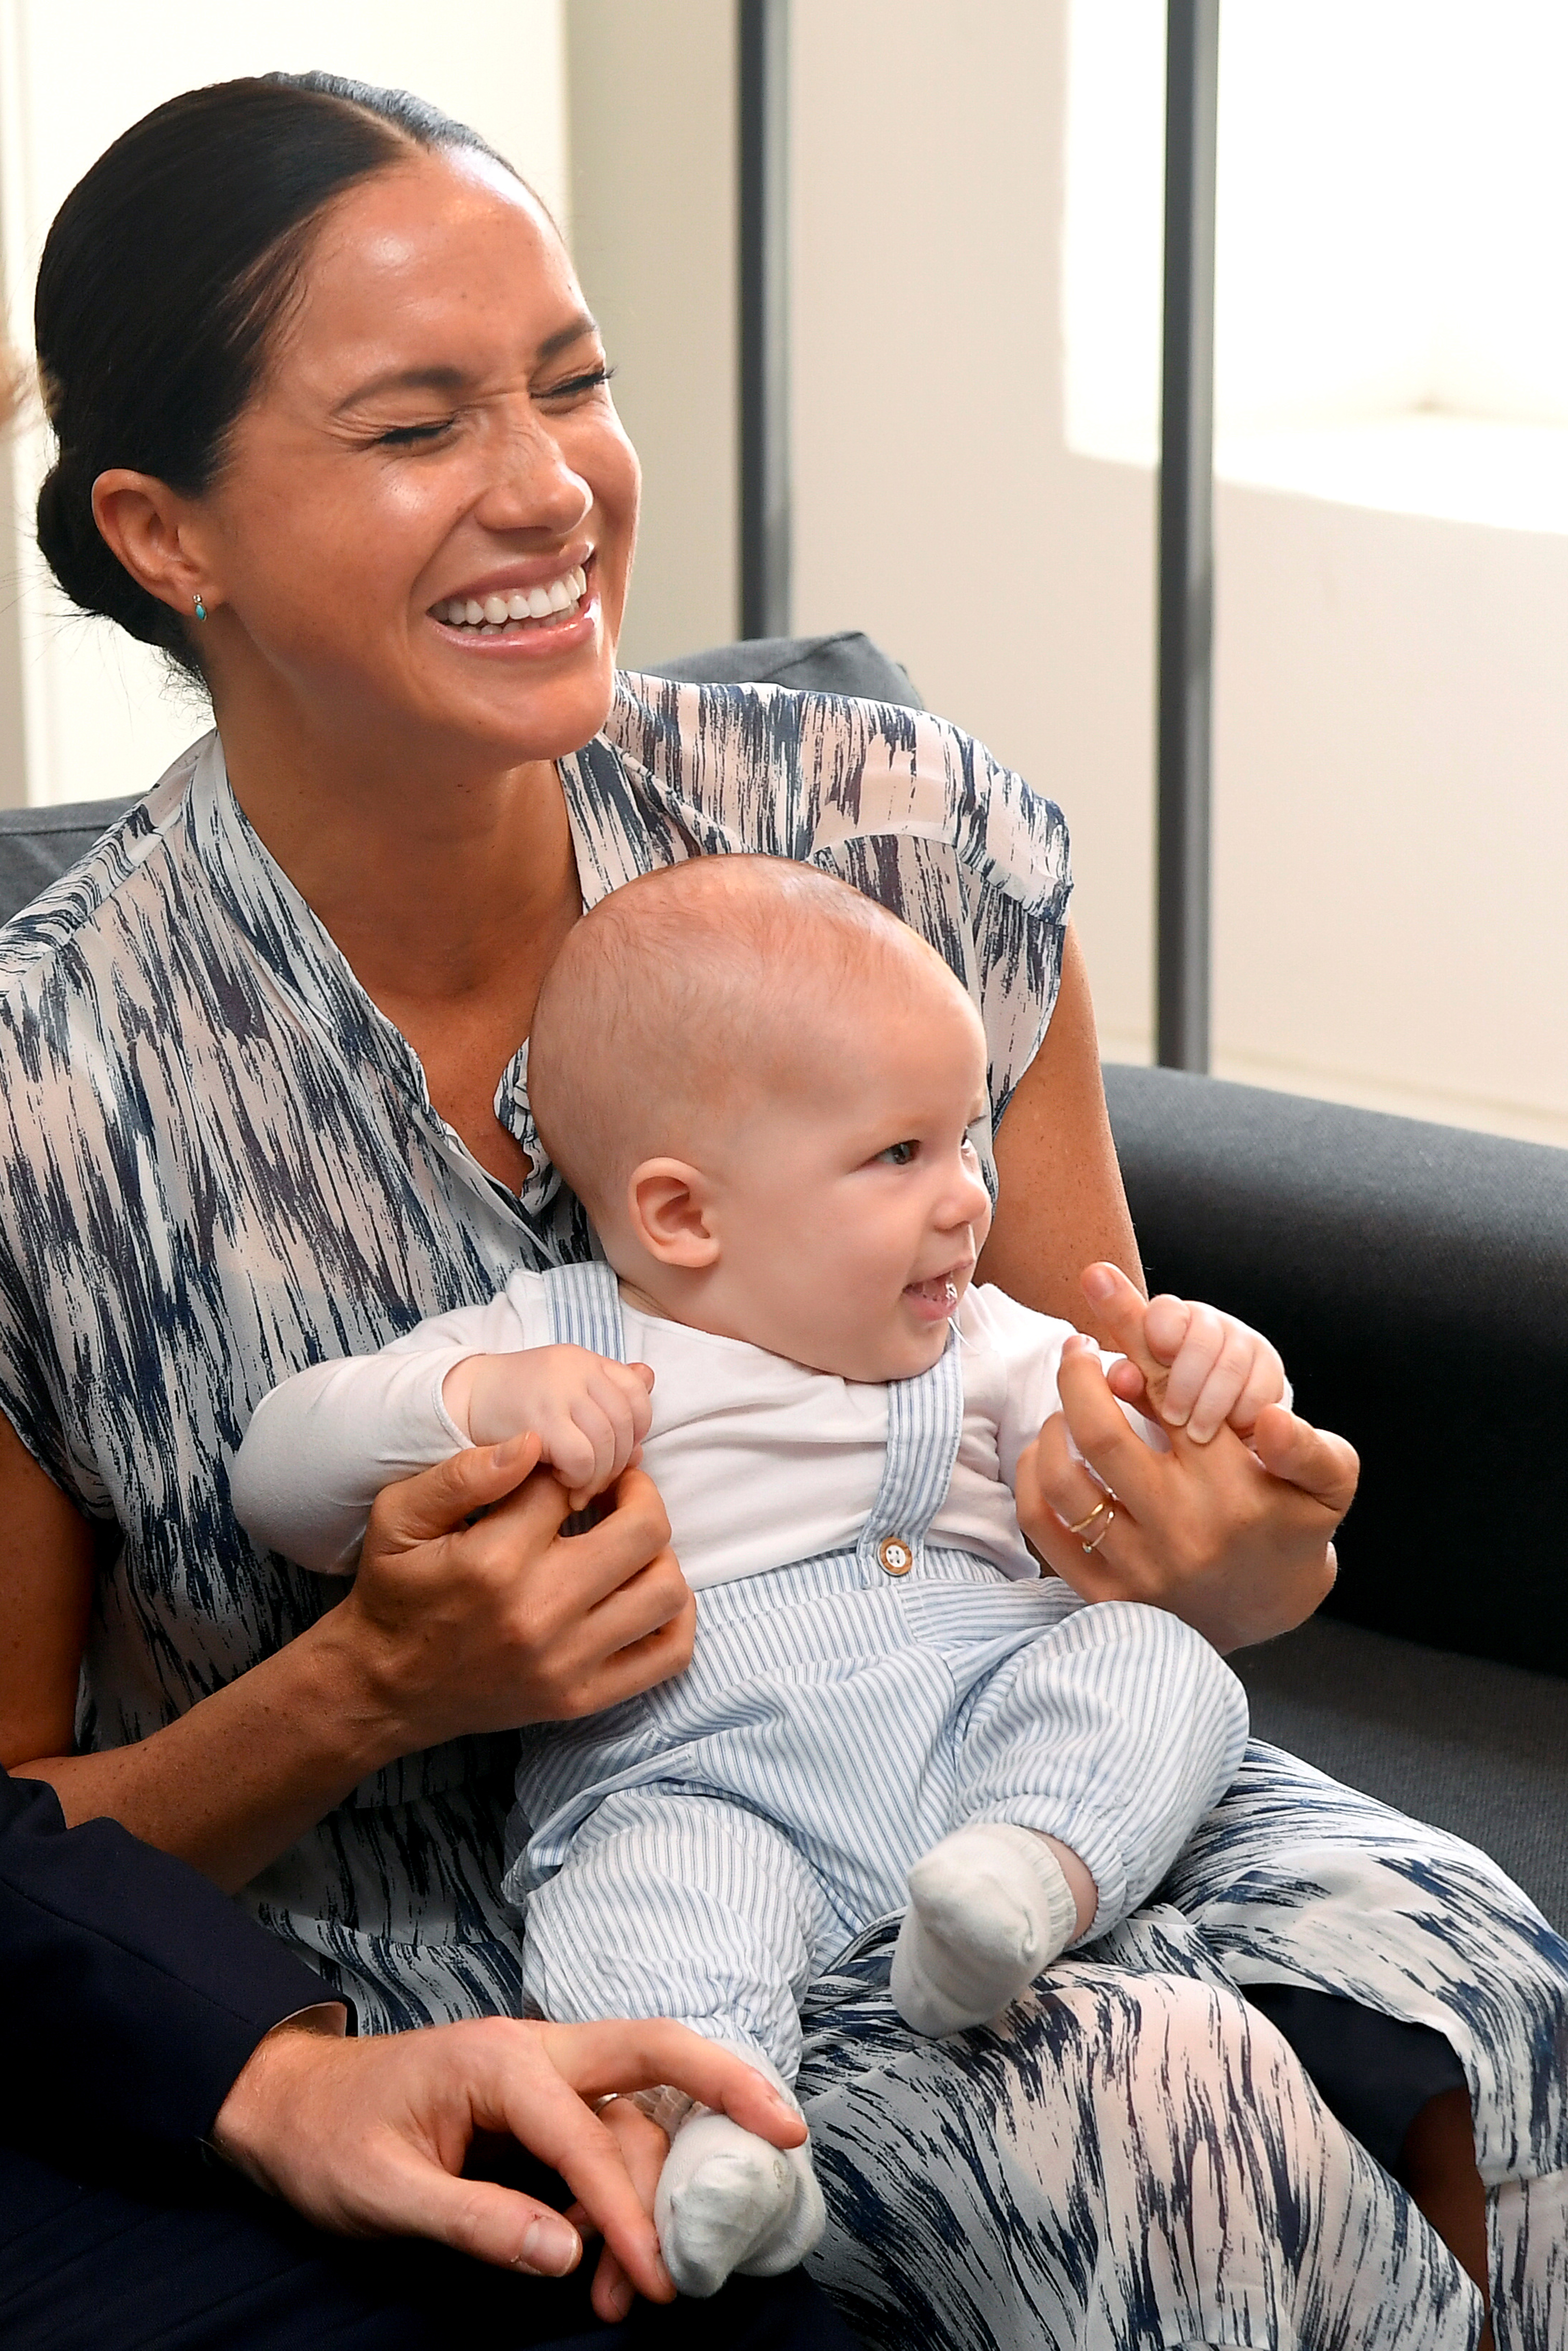 Meghan, Duchess of Sussex laughs as she holds Archie Mountbatten-Windsor at a meeting with Archbishop Desmond Tutu in Cape Town, South Africa, on September 25, 2019. | Source: Getty Images